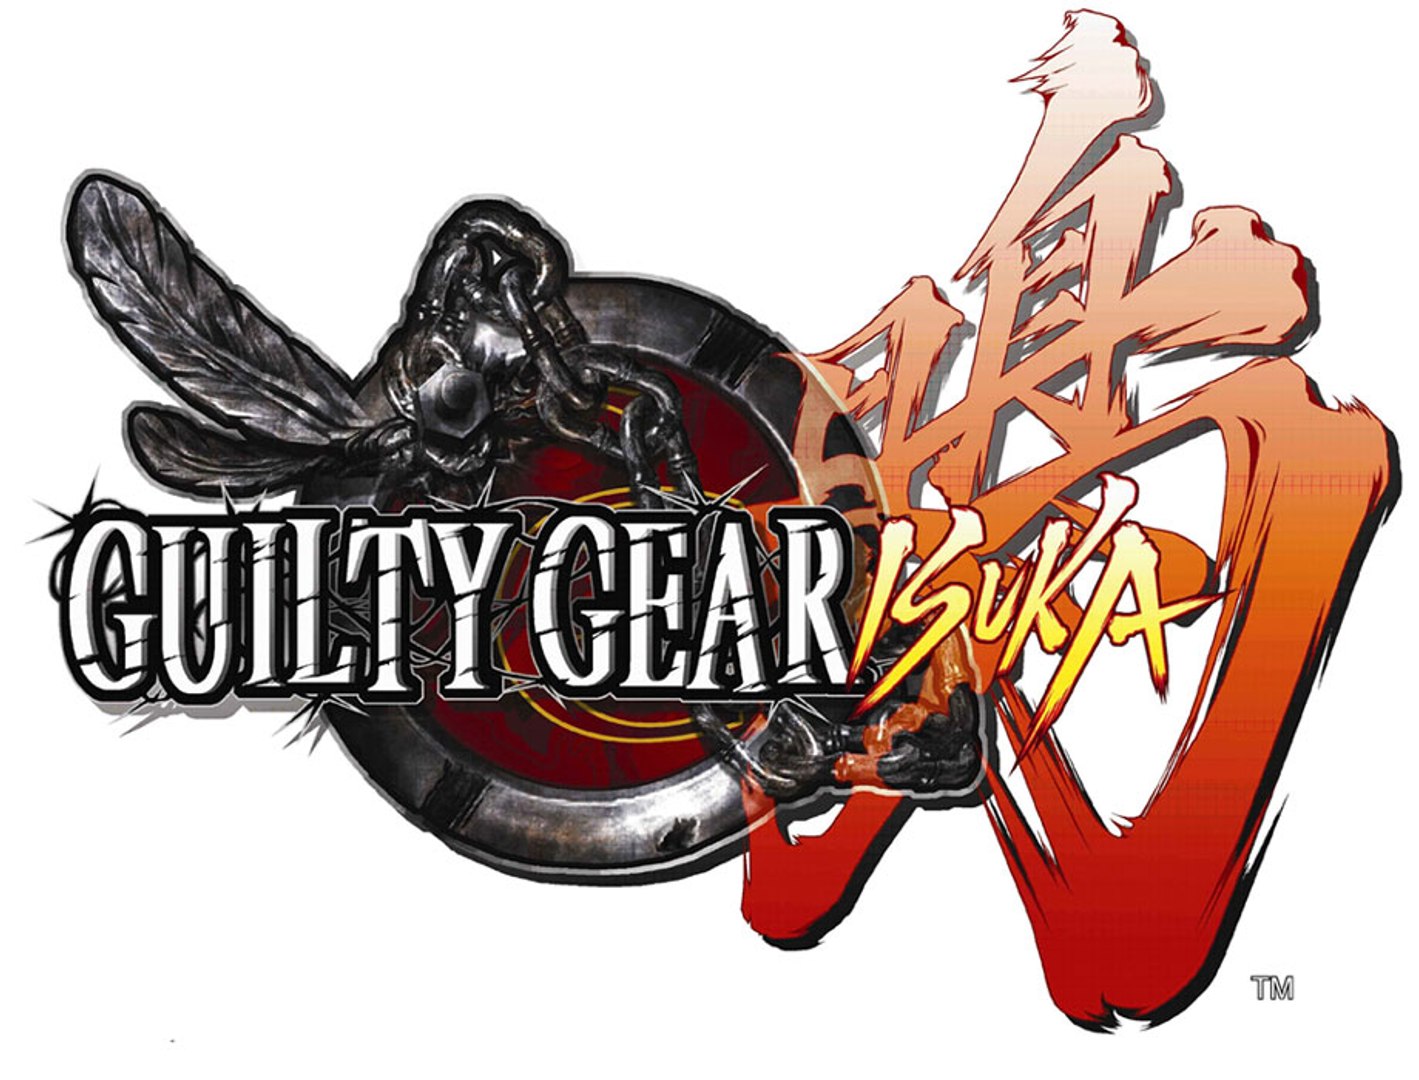 Guilty gear accent core plus r steam фото 115